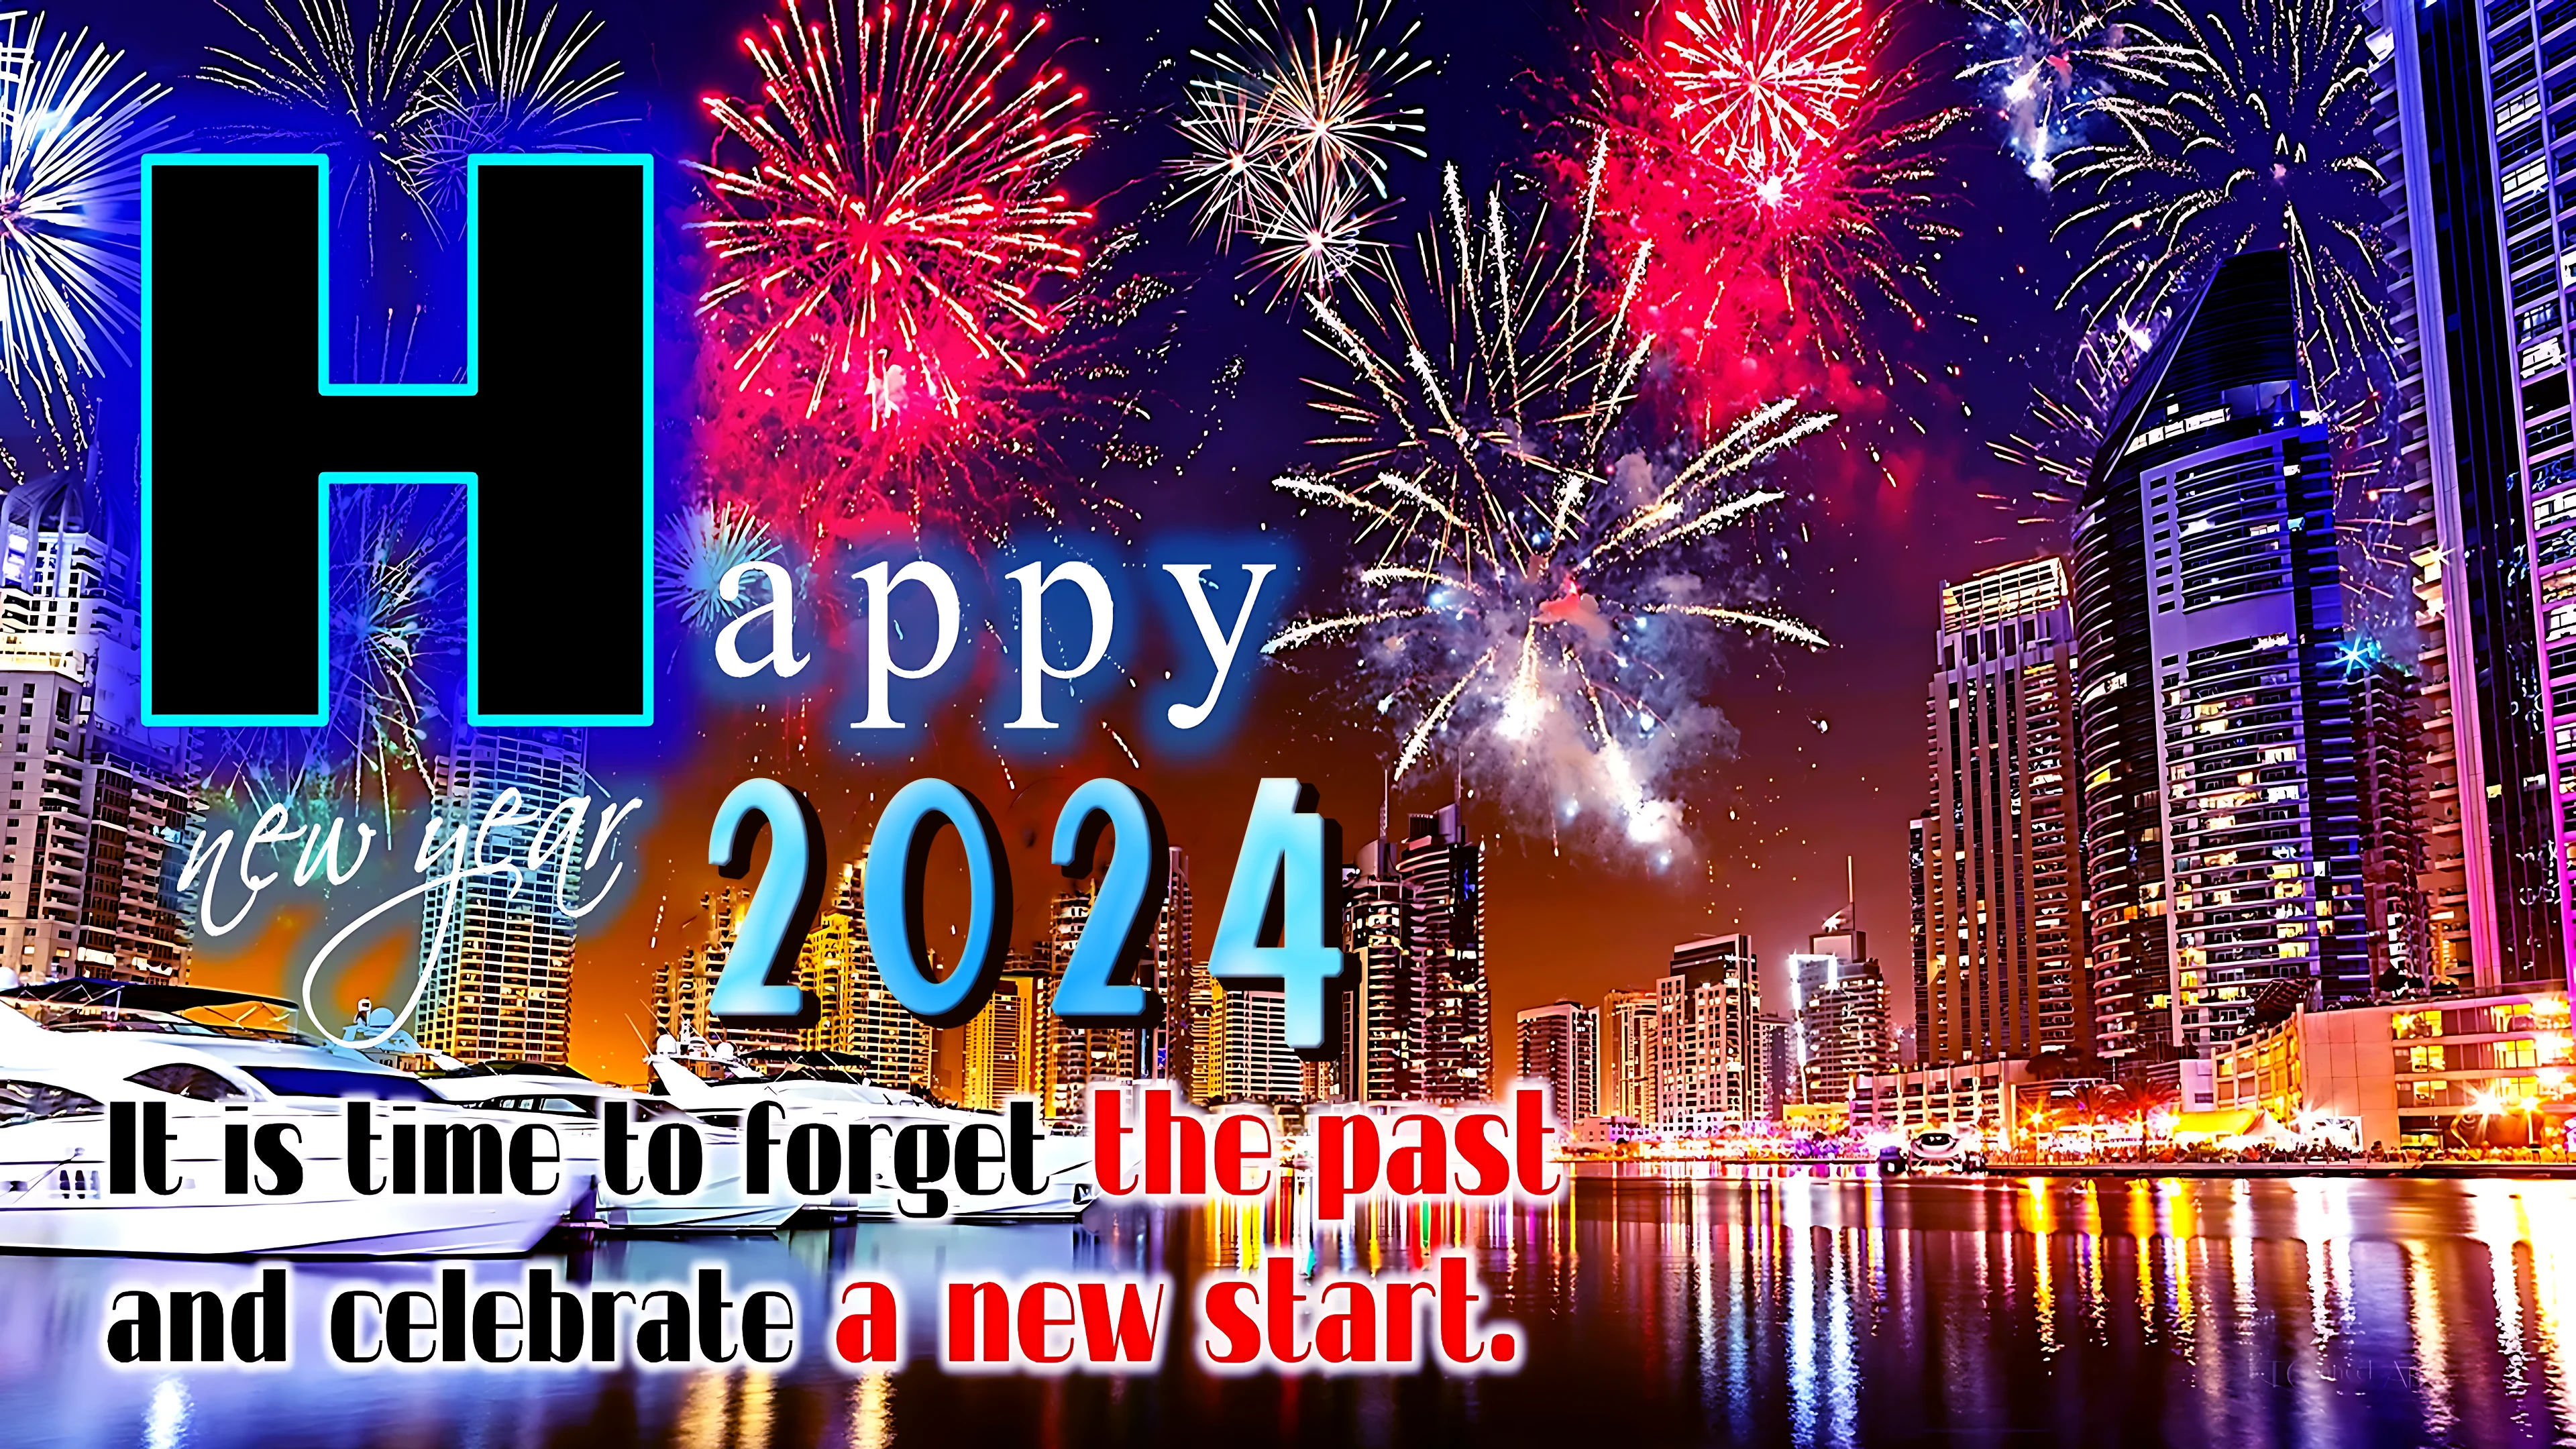 Happy new year 2024 4k image ^ It is time to forget the past and celebrate a new start